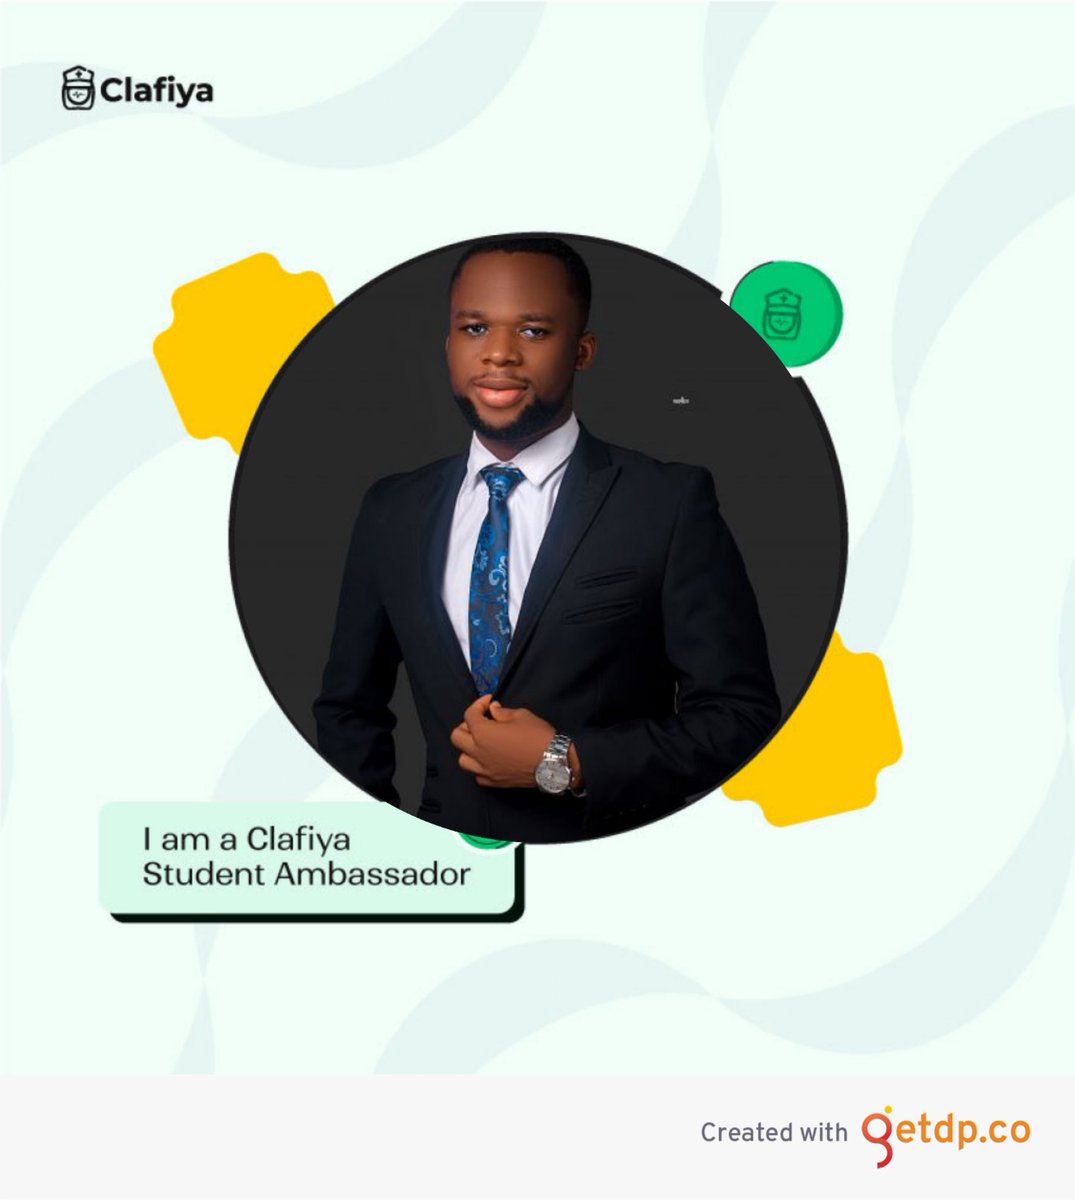 I remember the first time I got admitted some four years ago, I had been stuck in the waiting room for close to hours. What was supposed to be a simple stomach pain was exacerbated with 

#ClafiyaAmbassador #carethatcomestoyou #studentambassador